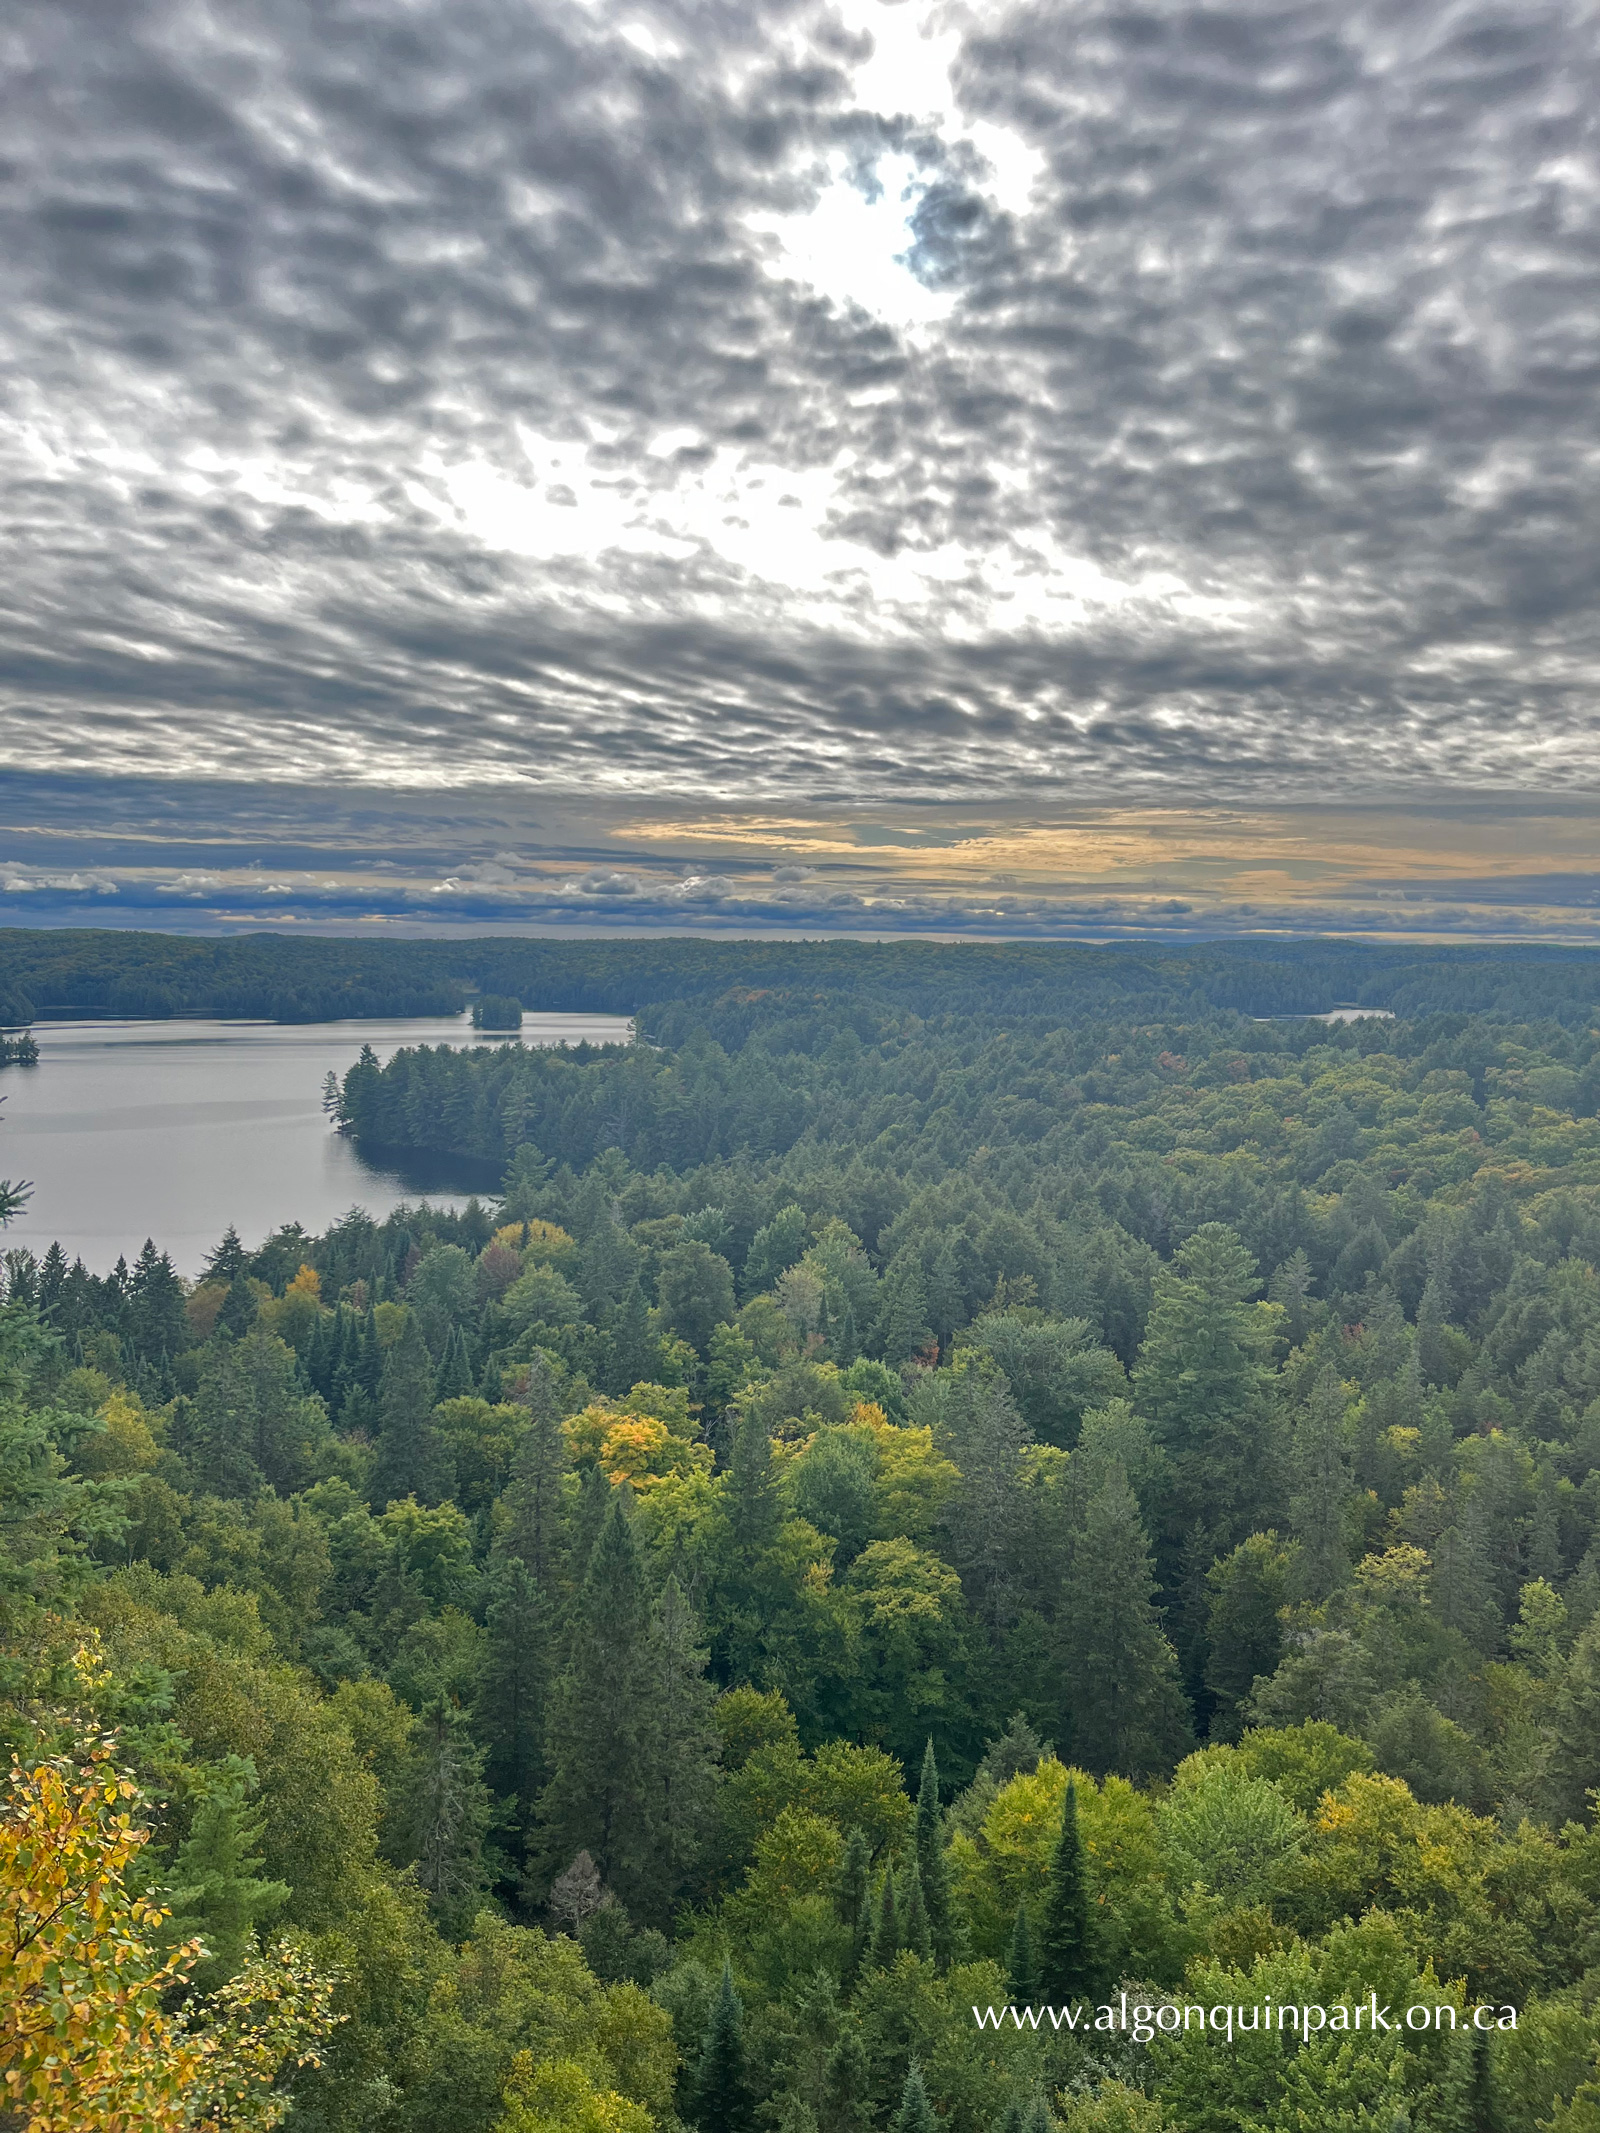 Cache Lake as seen from the Track and Tower Trail in Algonquin Park on September 16, 2022